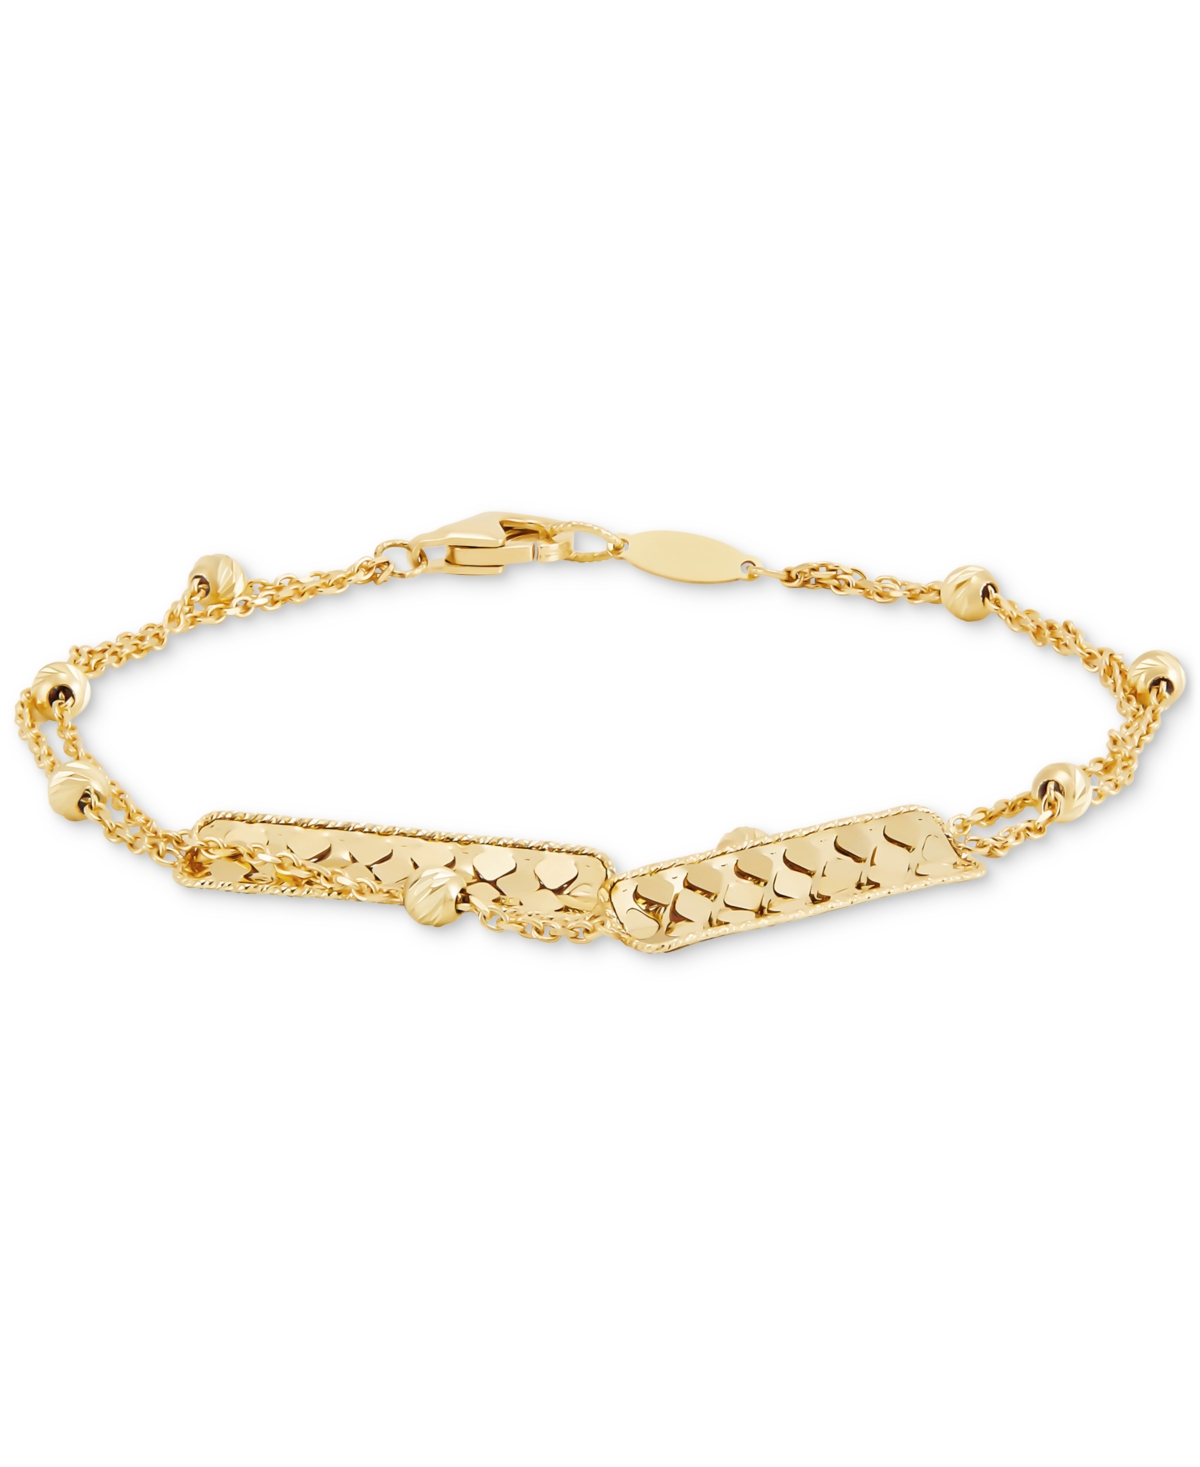 Italian Gold Polished Double Row Bar & Beads Station Link Bracelet In 14k Gold In Yellow Gold